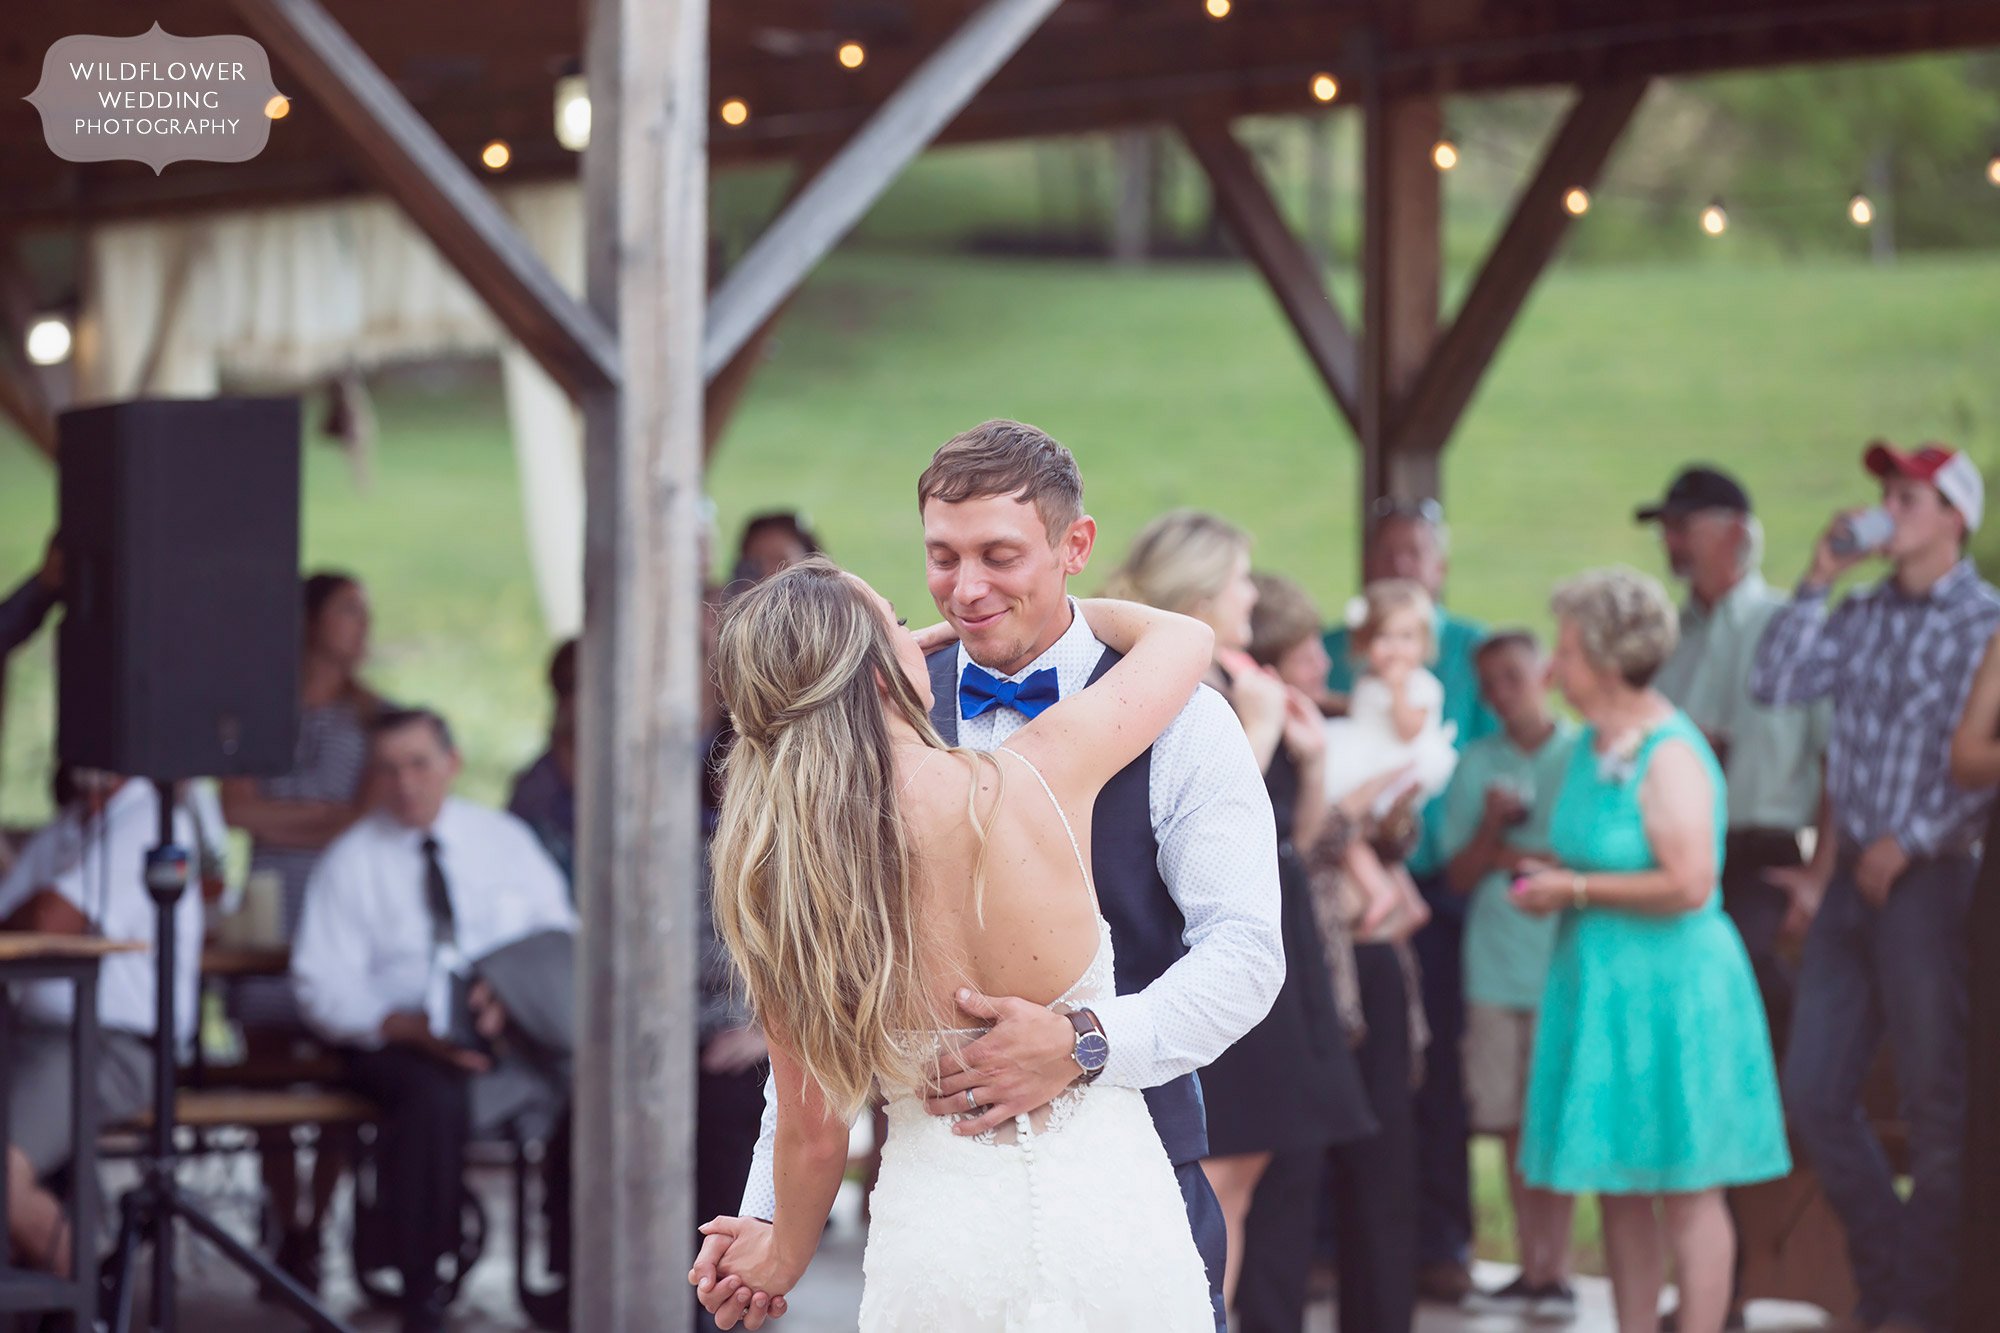 The bride and groom have a romantic first dance during their country barn wedding at the Kempker's Back 40 venue.